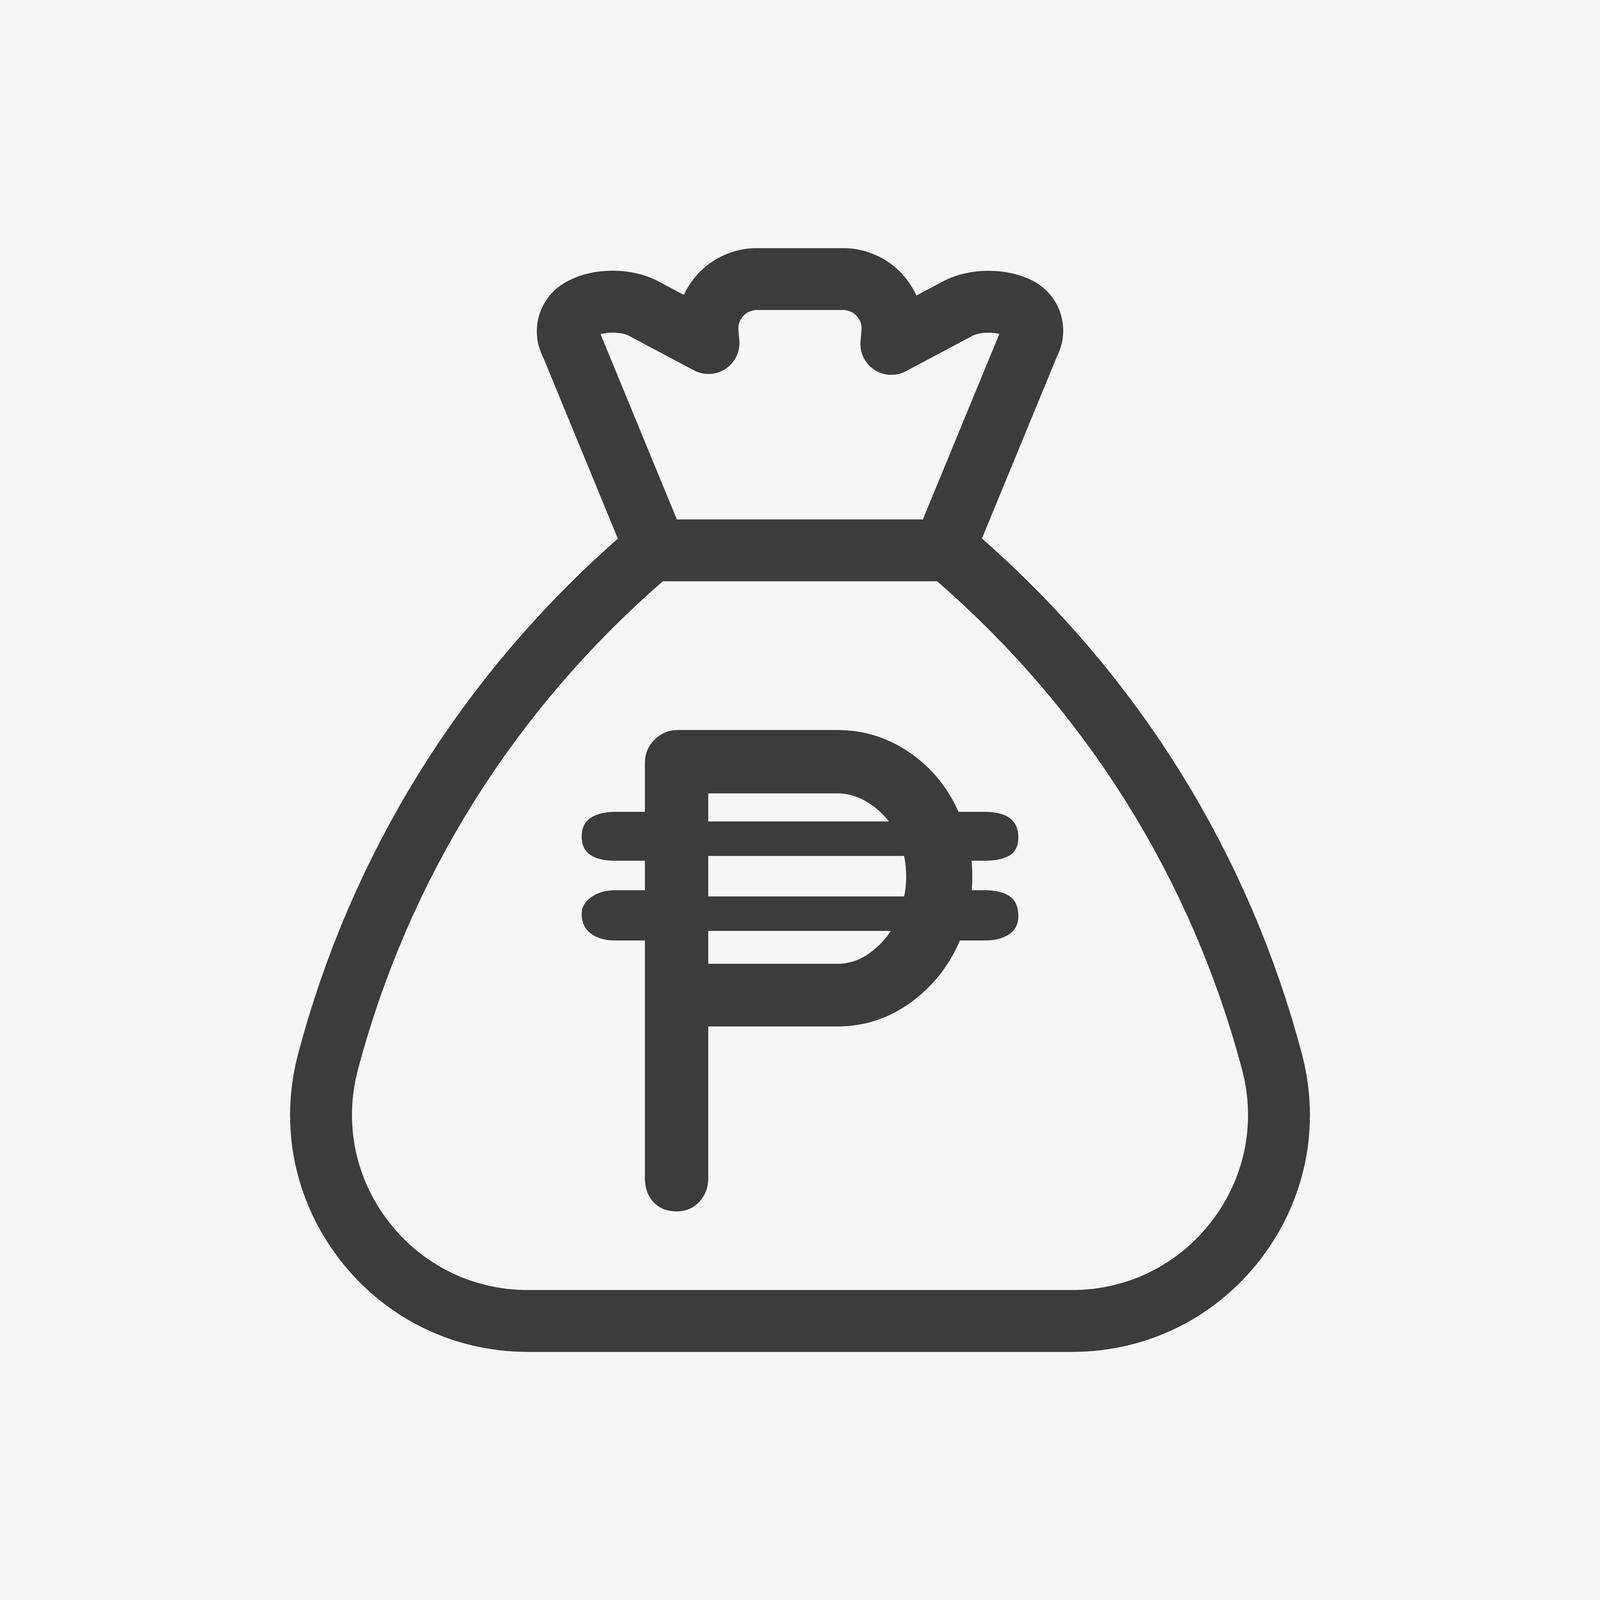 Philippine peso icon. Sack with PHP currency by AdamLapunik